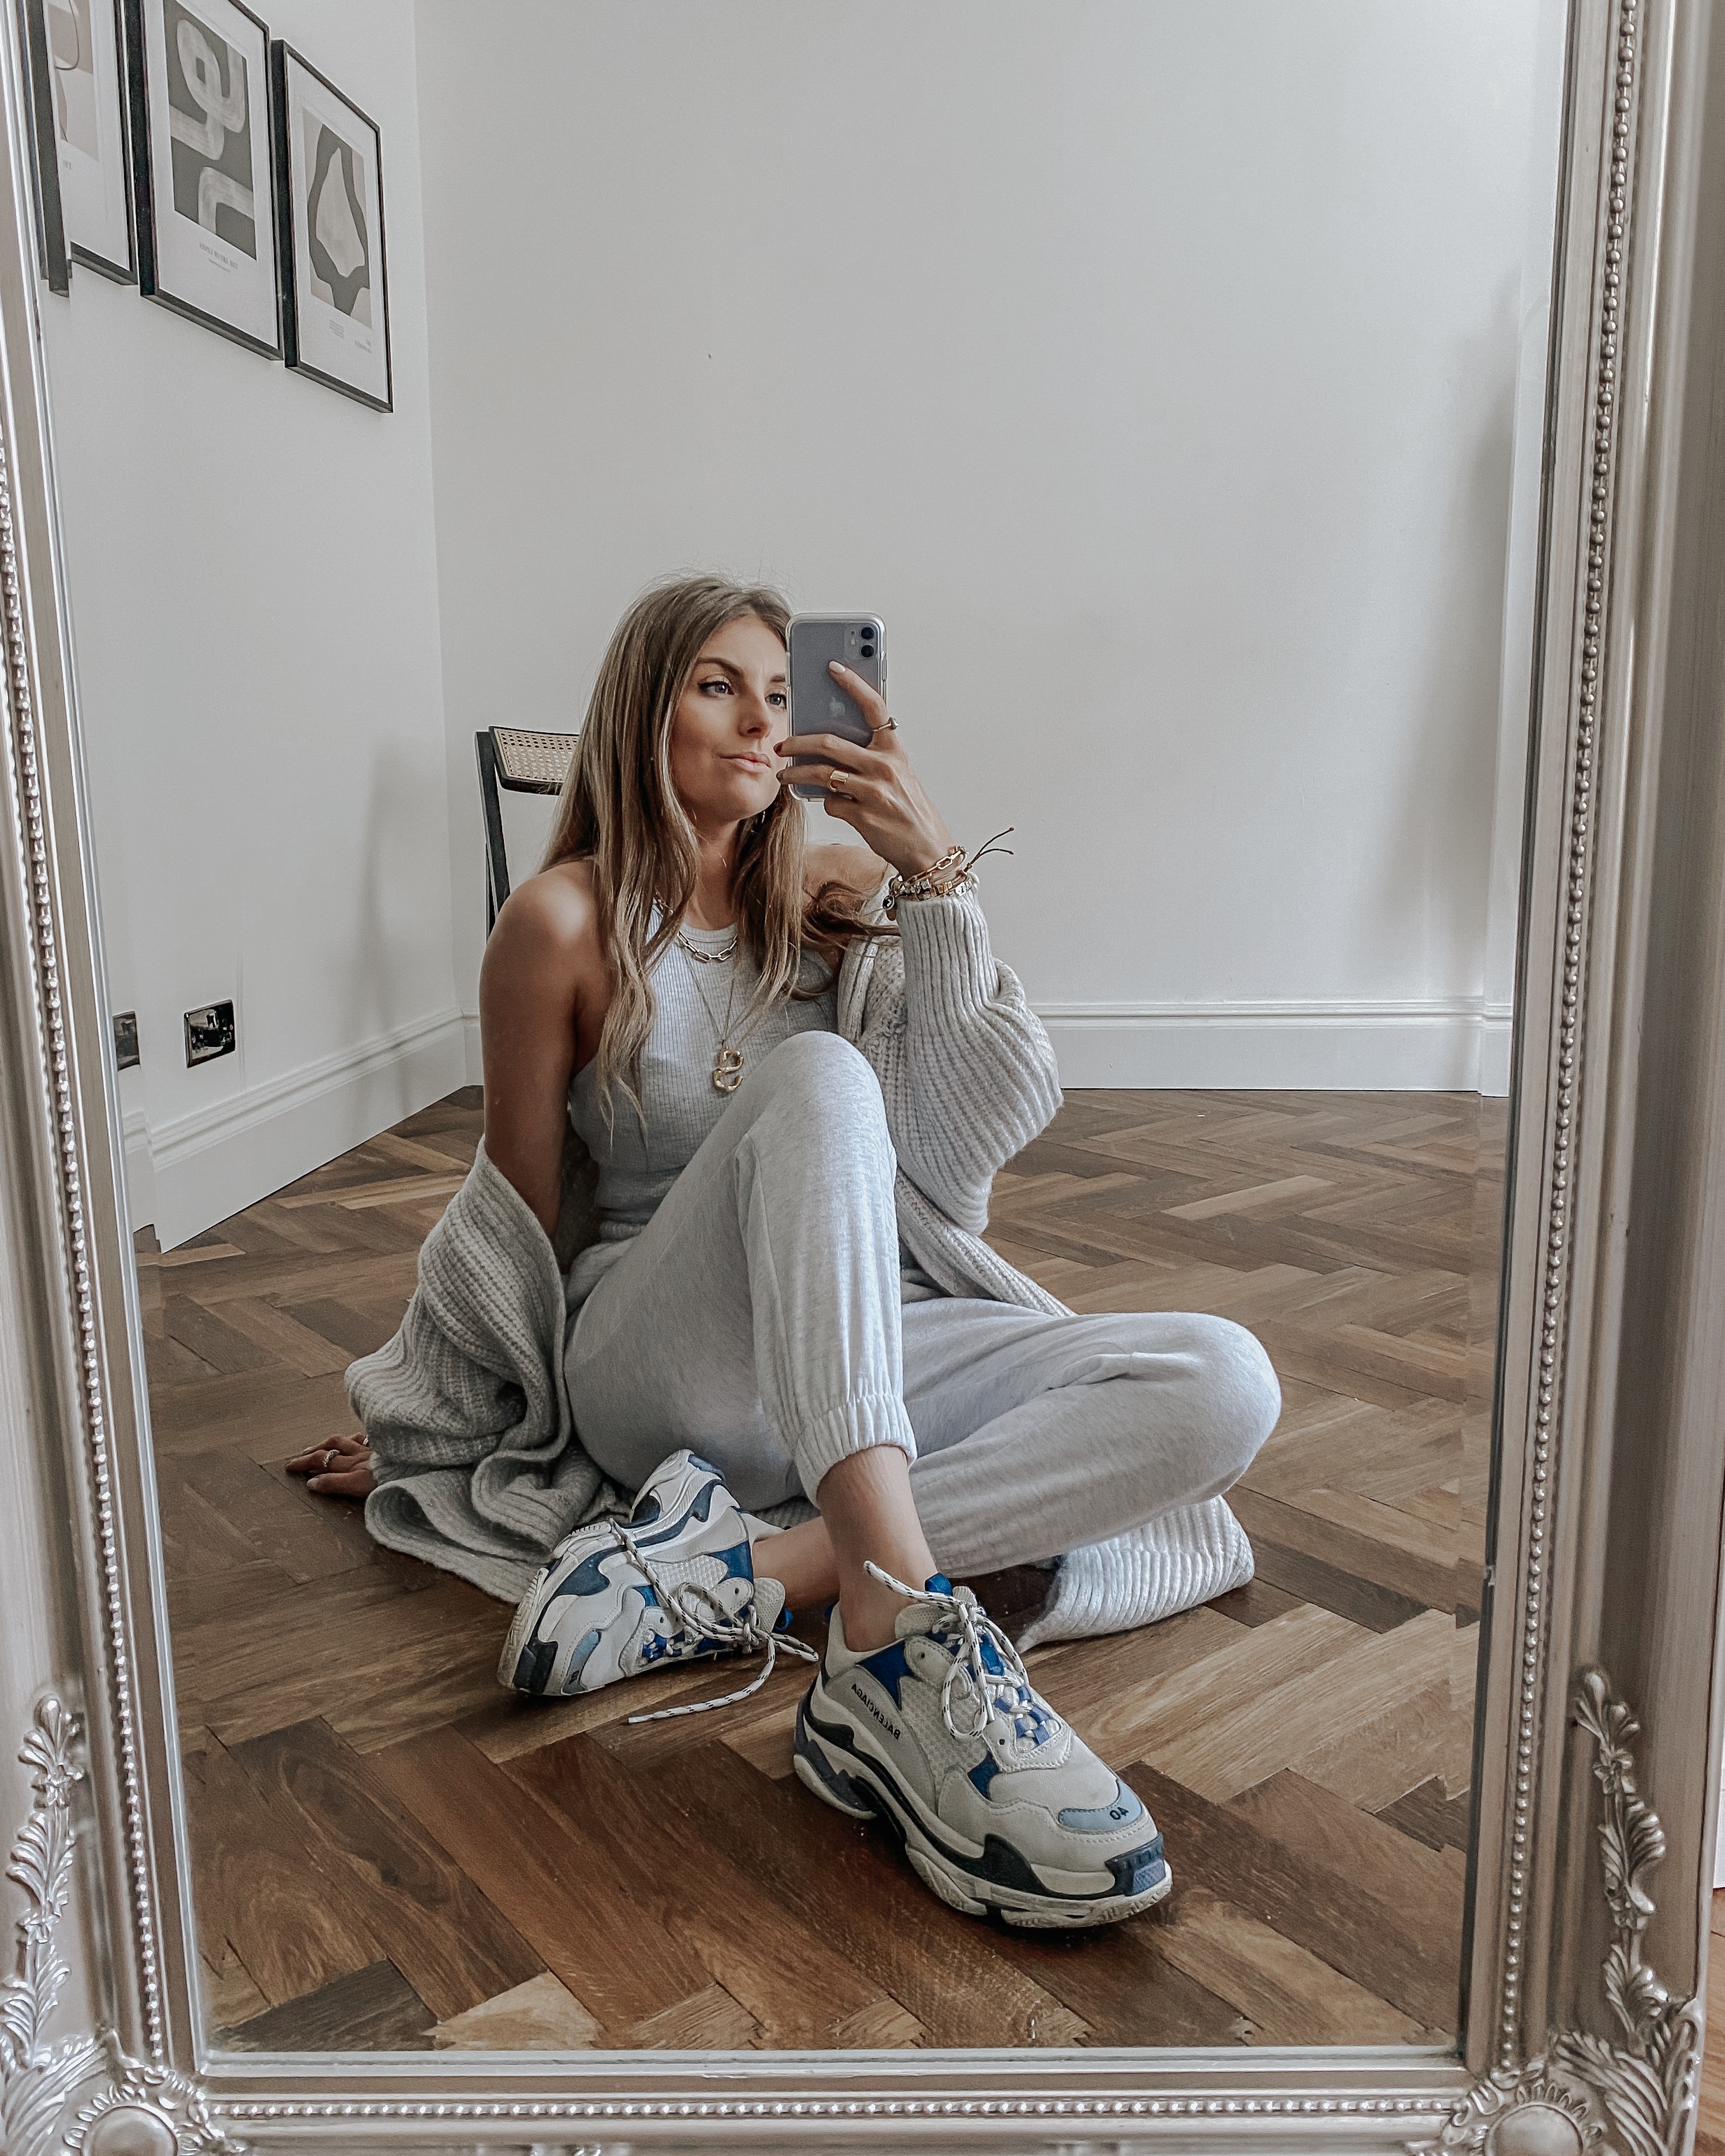 Styling Joggers in 5 Easy Ways – Love Style Mindfulness – Fashion